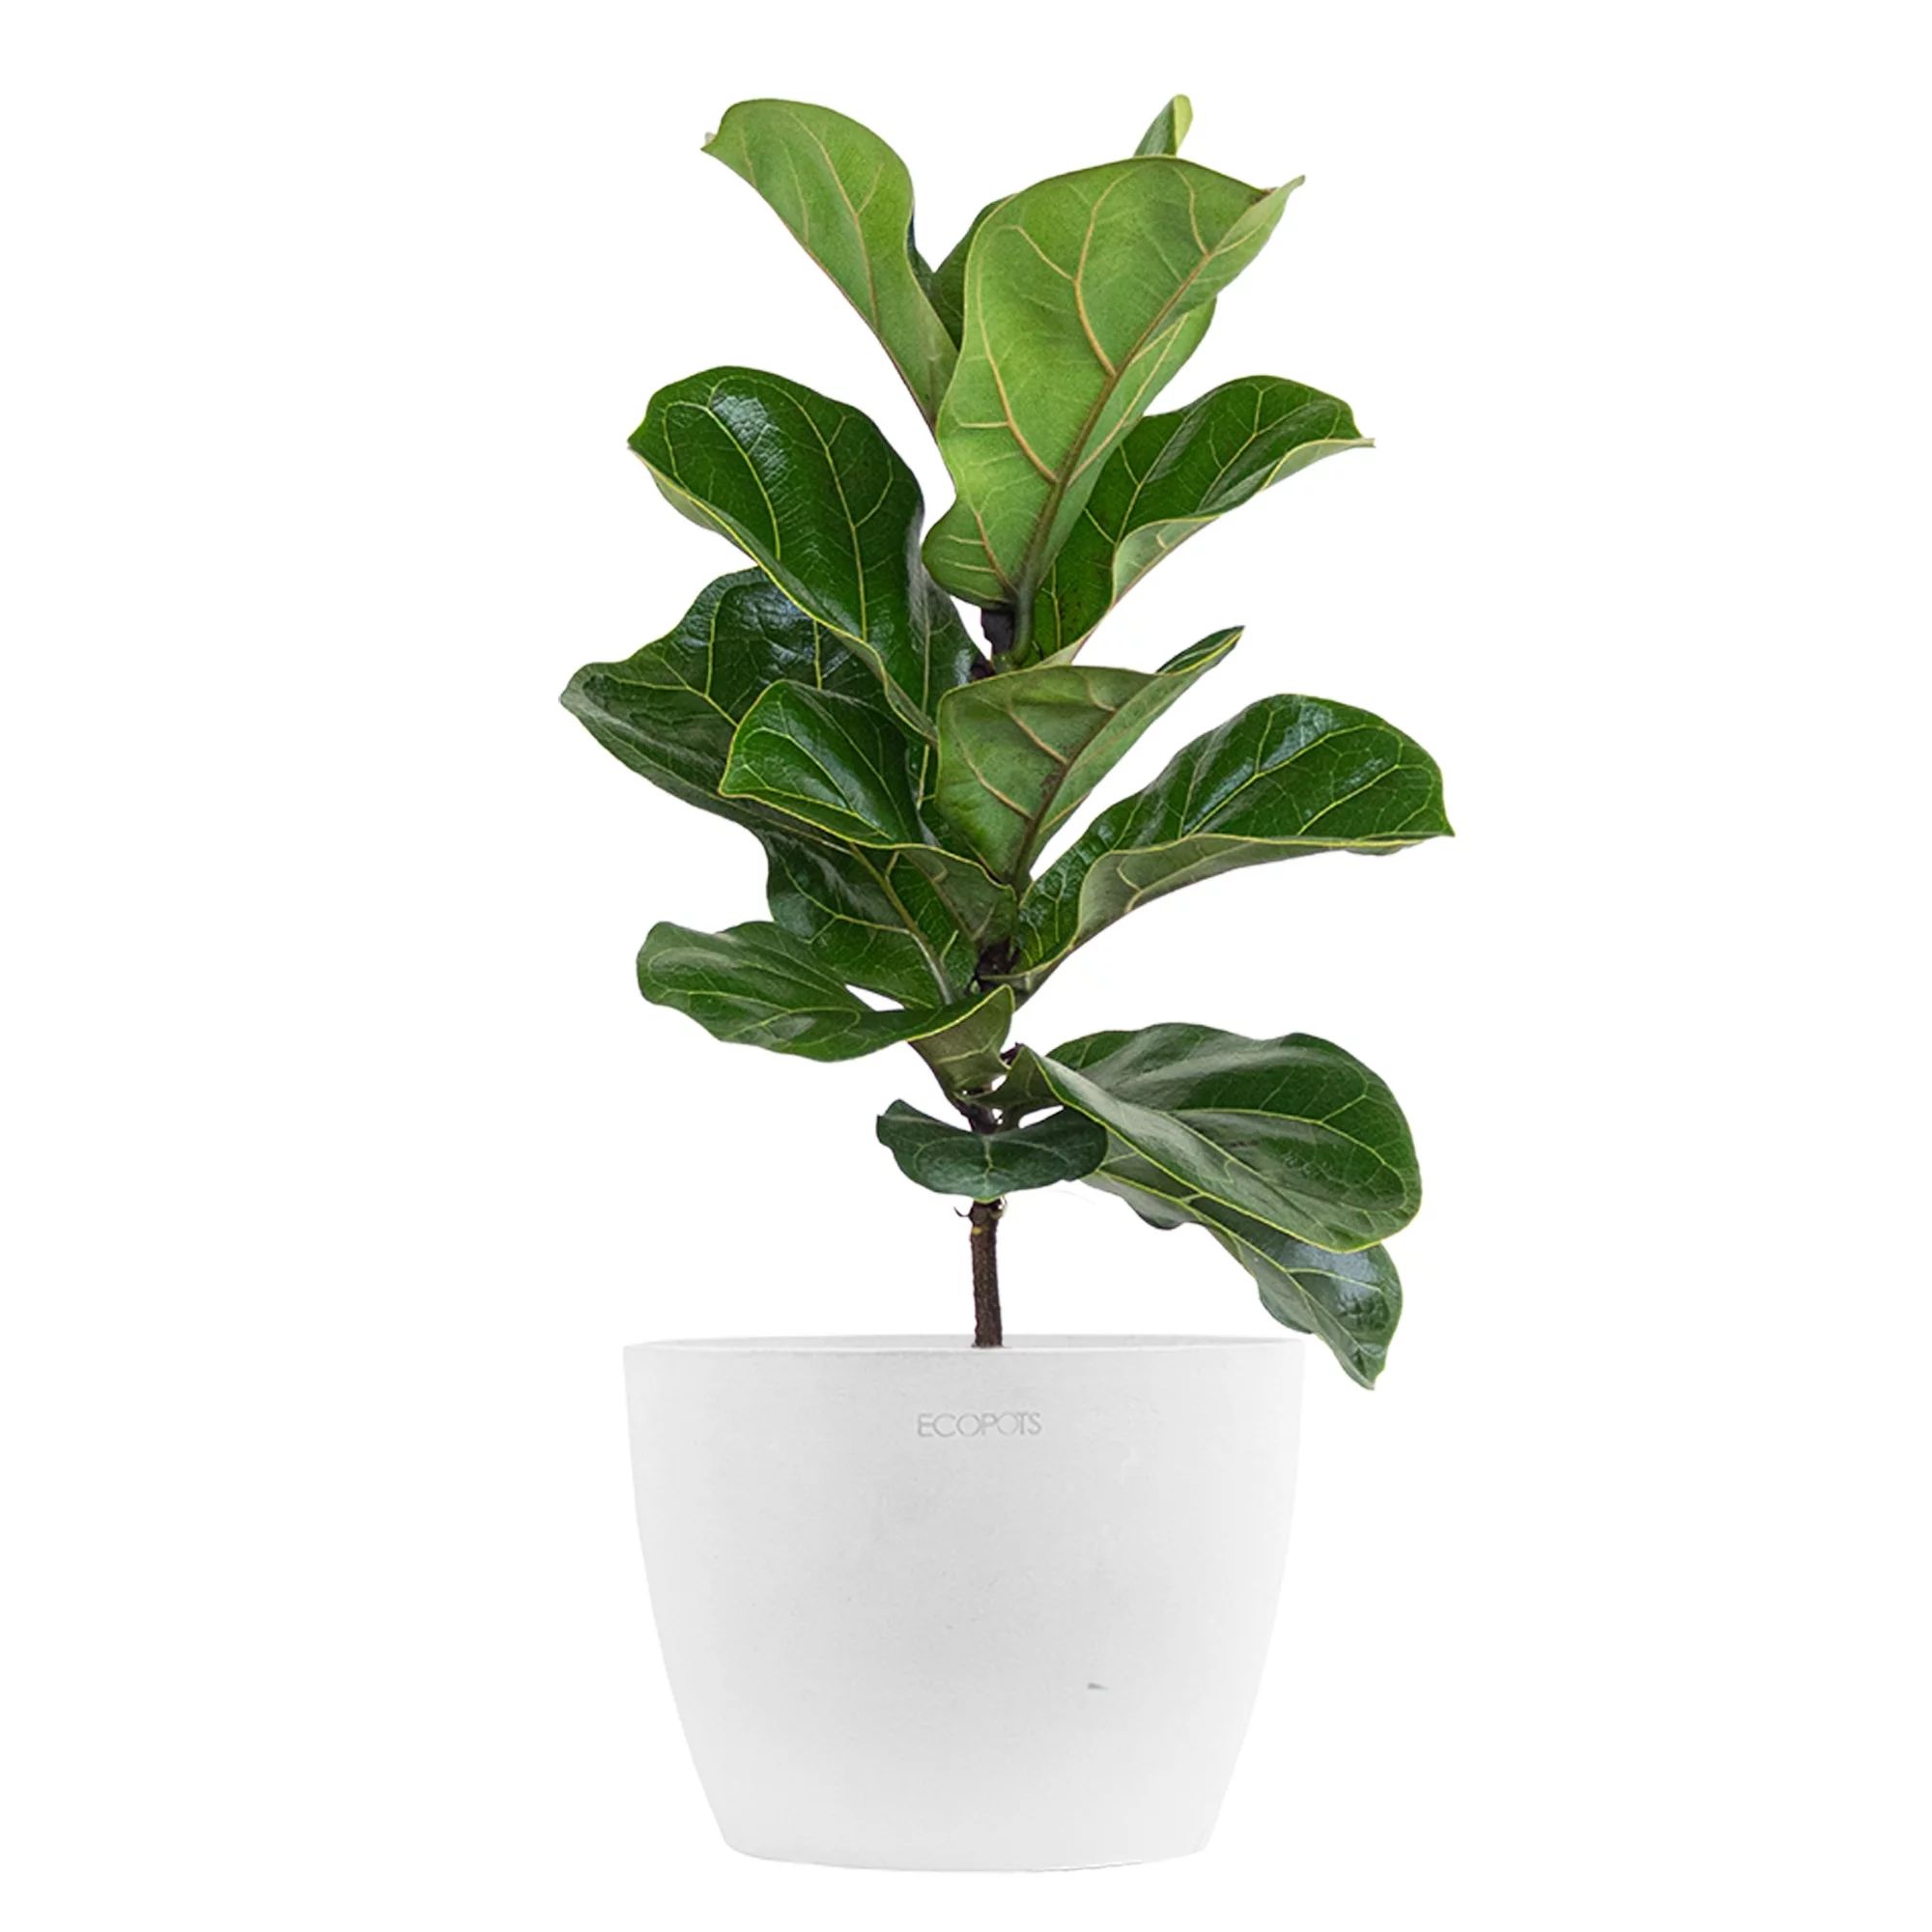 United Nursery Live Fiddle Leaf Fig Houseplant 12-14in Tall in 6 inch Premium Ecopots Pure White | Walmart (US)